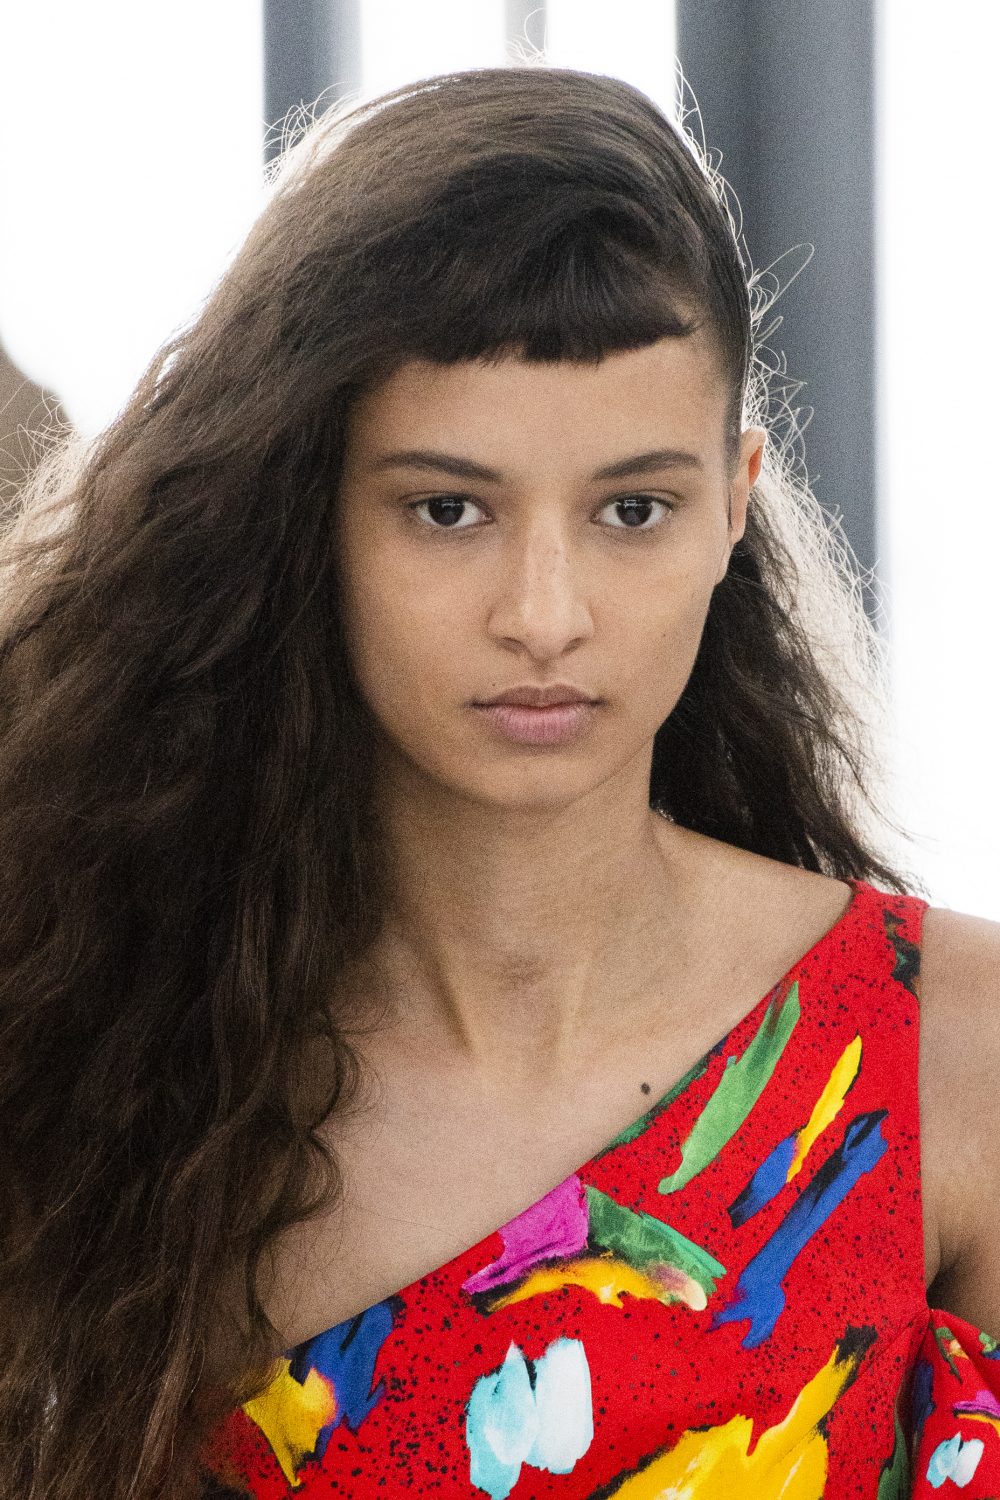 Louis Vuitton hair” is trending hard – here are 9 looks to get you